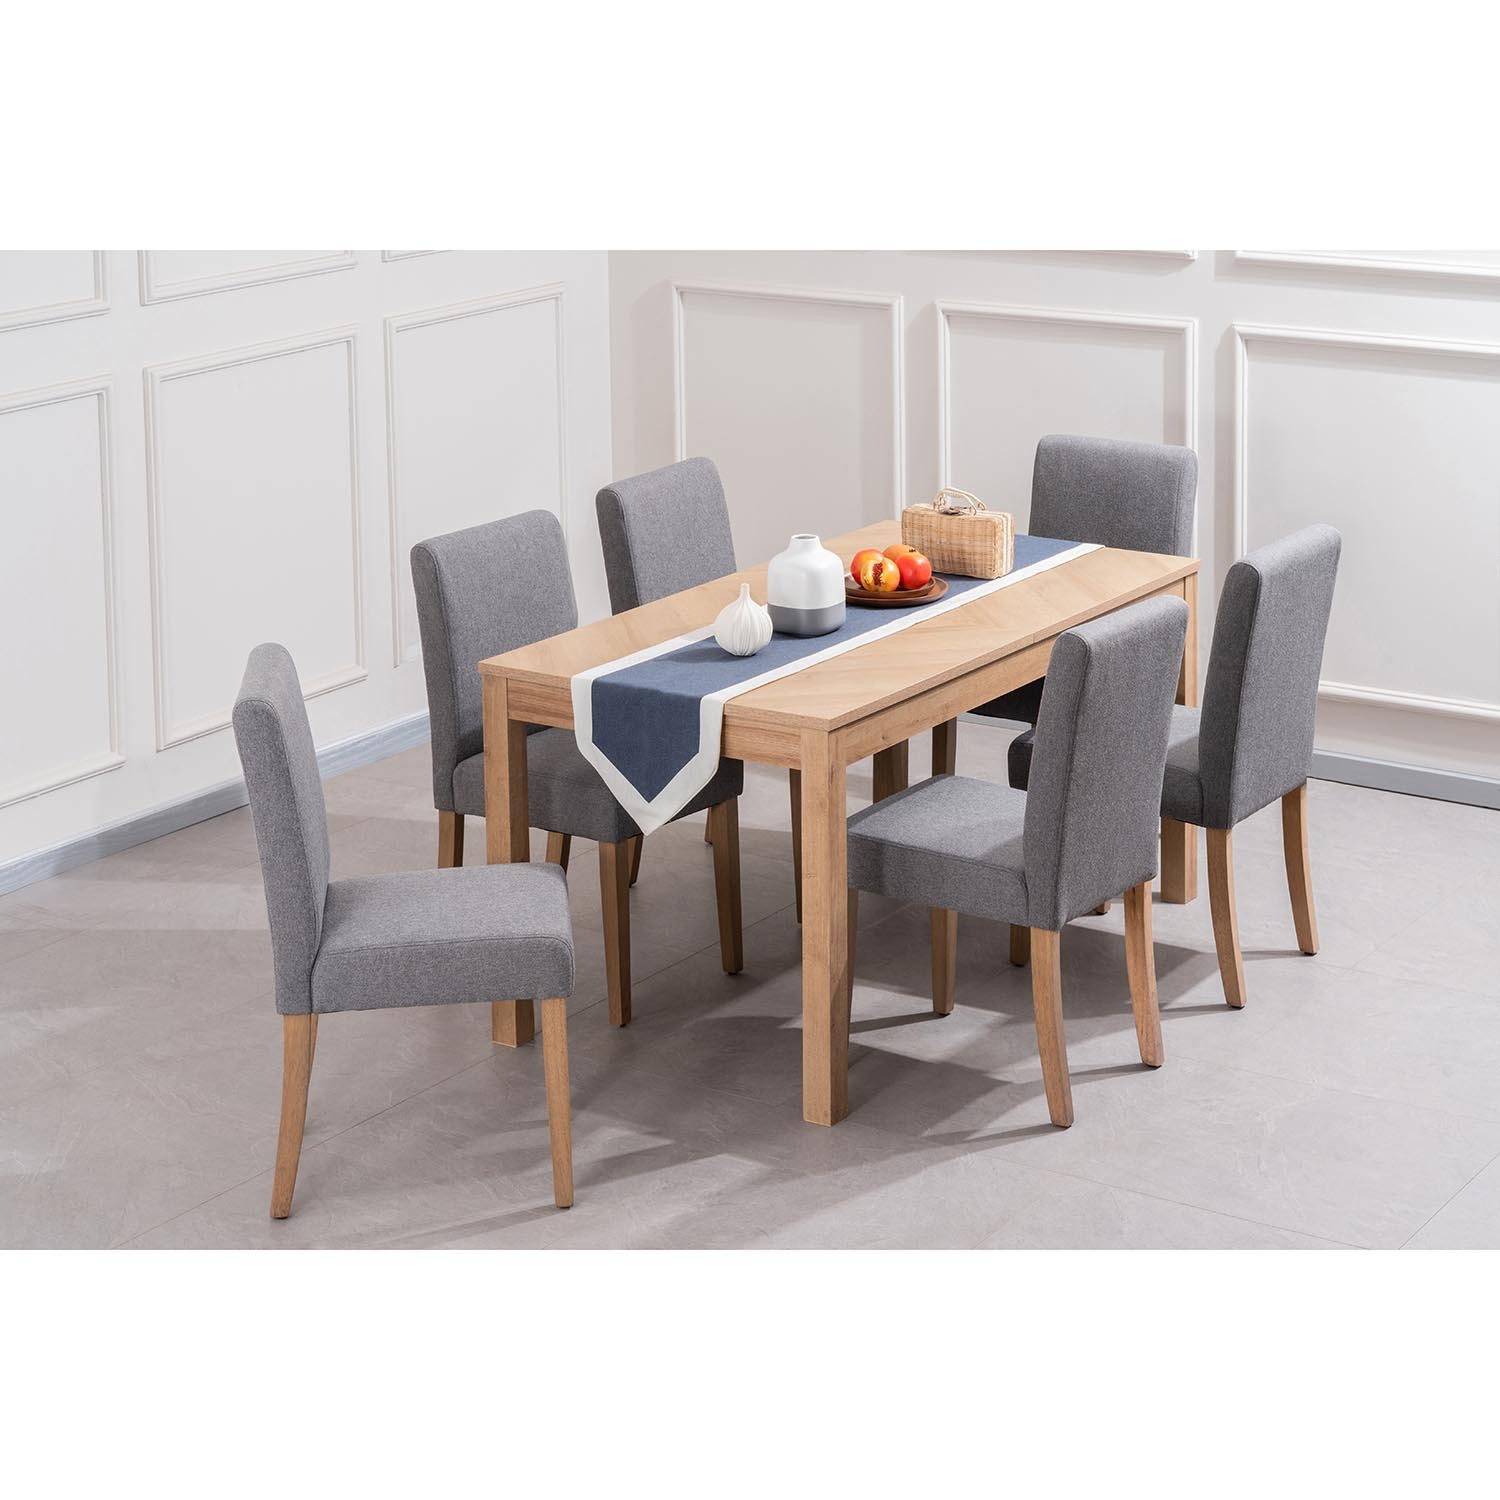 Oxford Parquet 6 Seater 150 to 190cm Extending Dining Table Oak Image 9